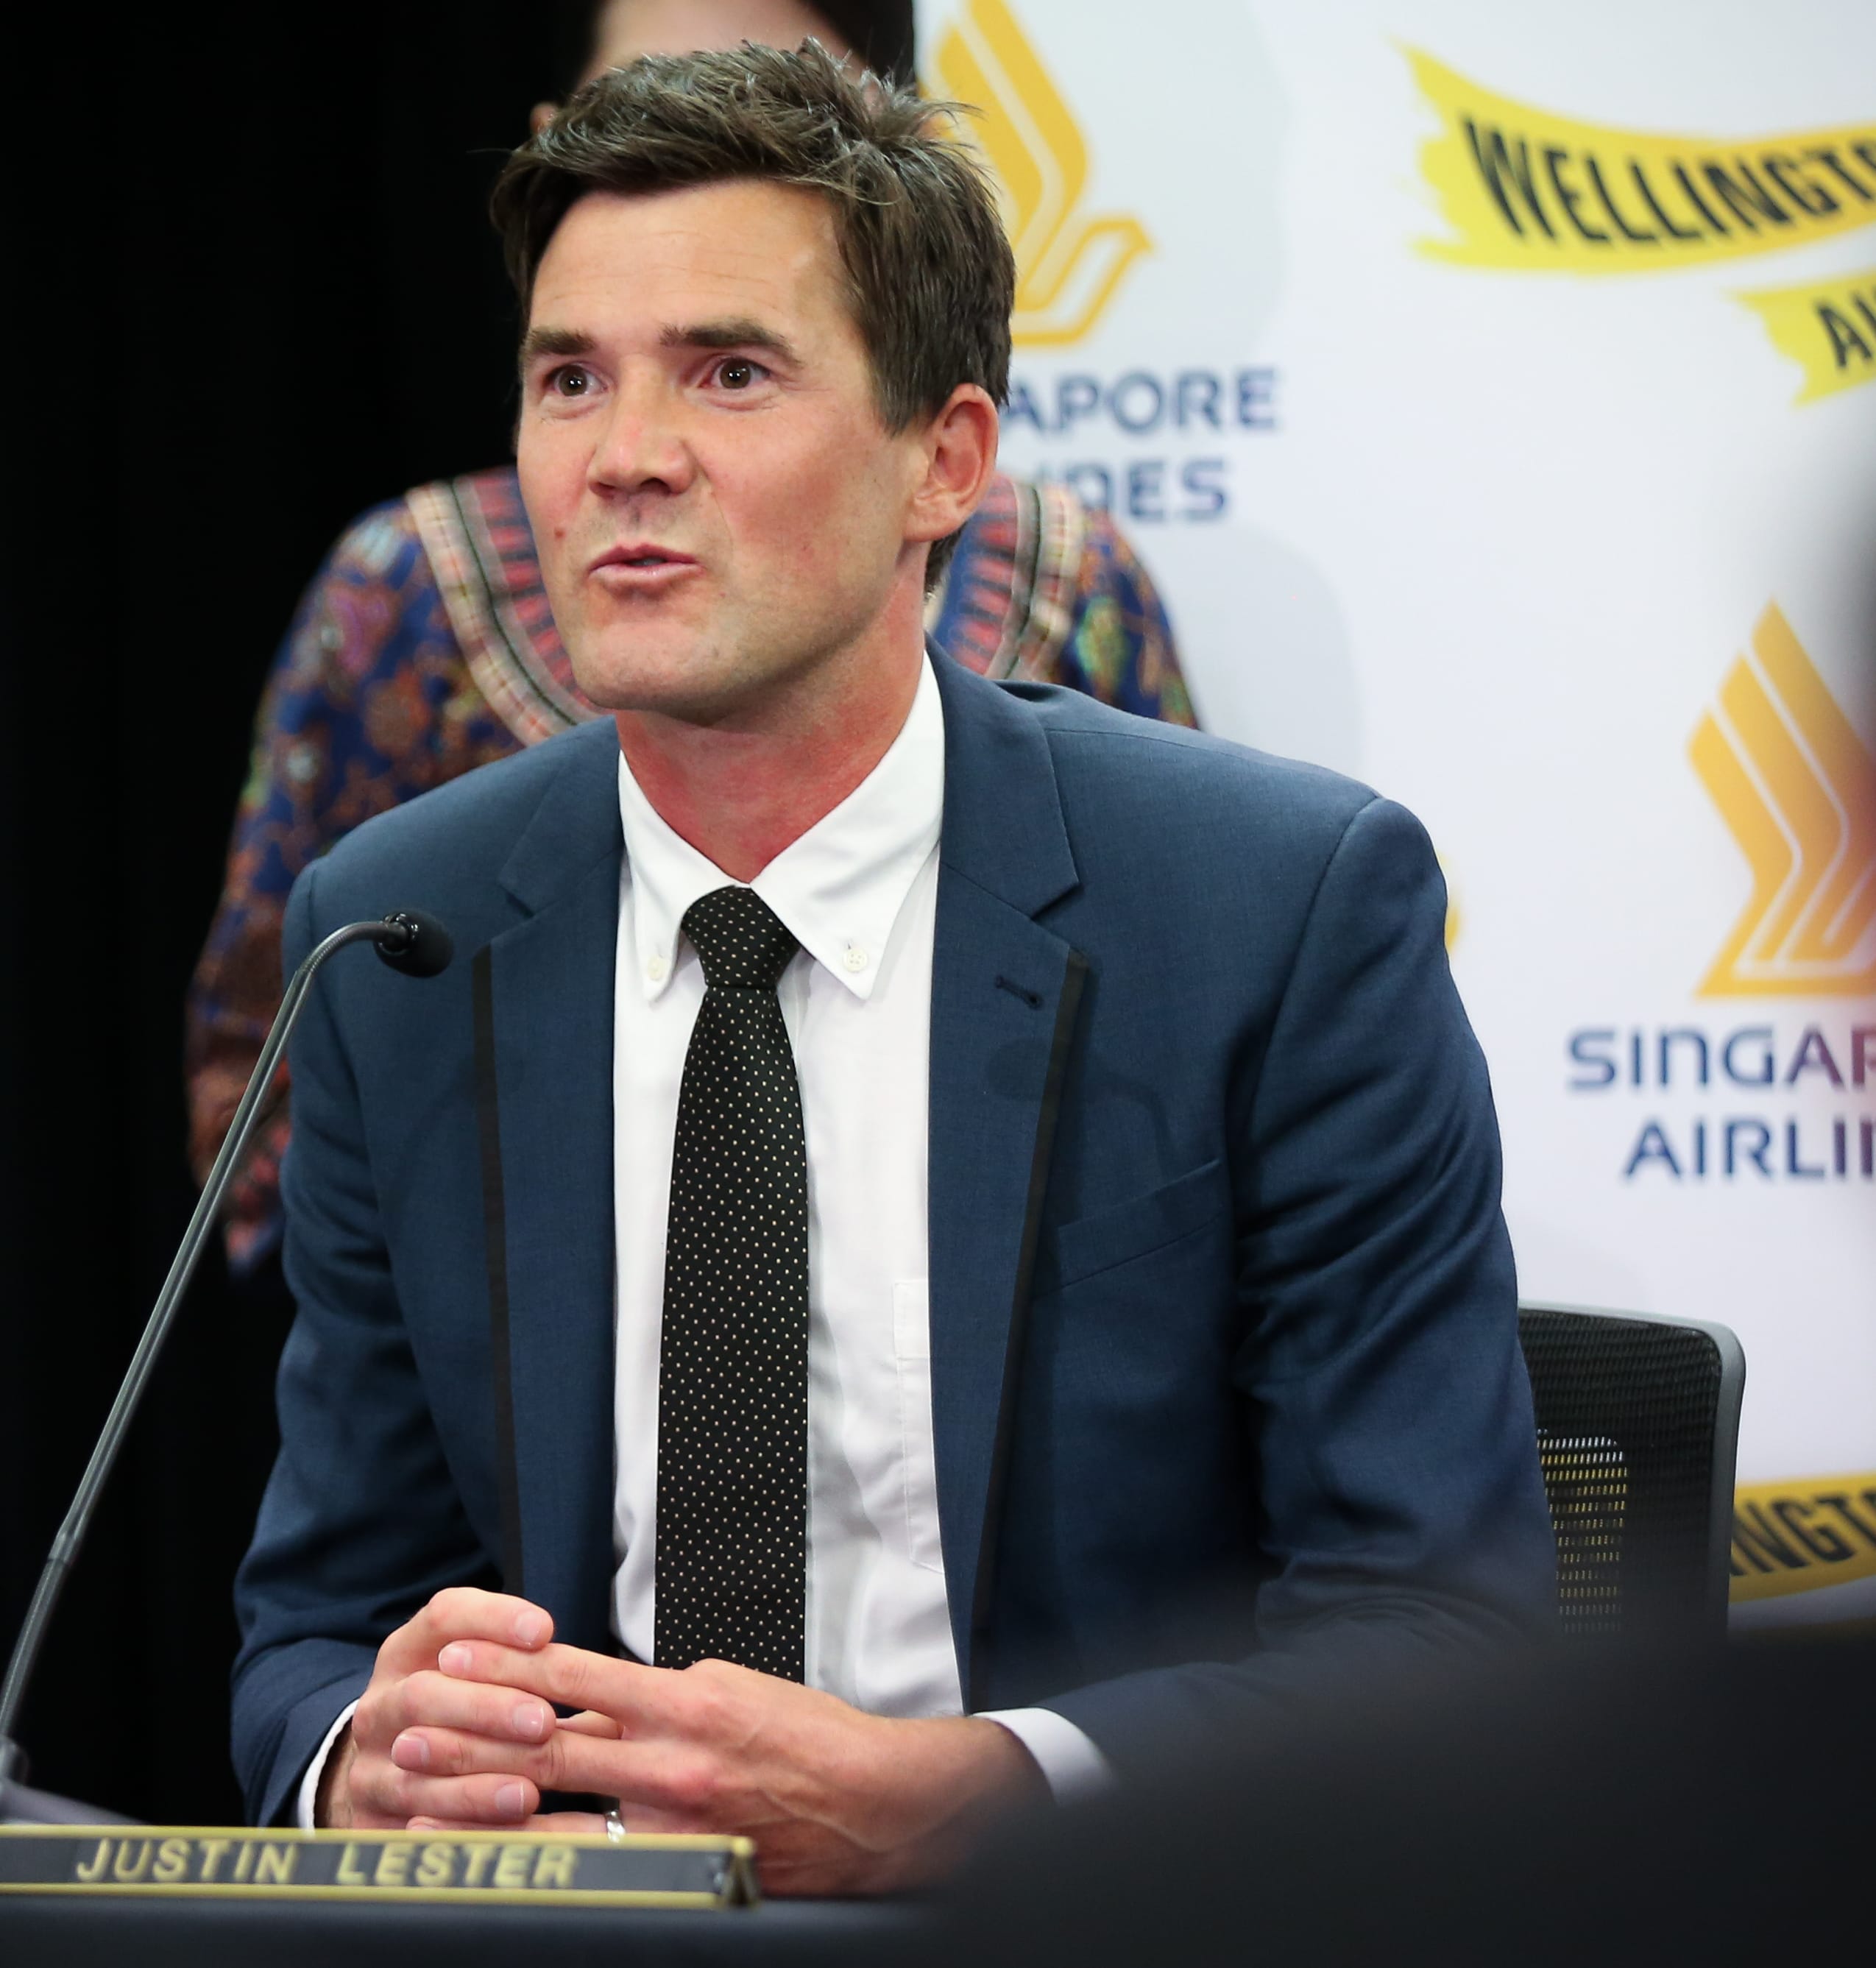 Wellington City Council Deputy Mayor Justin Lester at the Singapore Airline announcement  of flights from Wellington to Canberra.